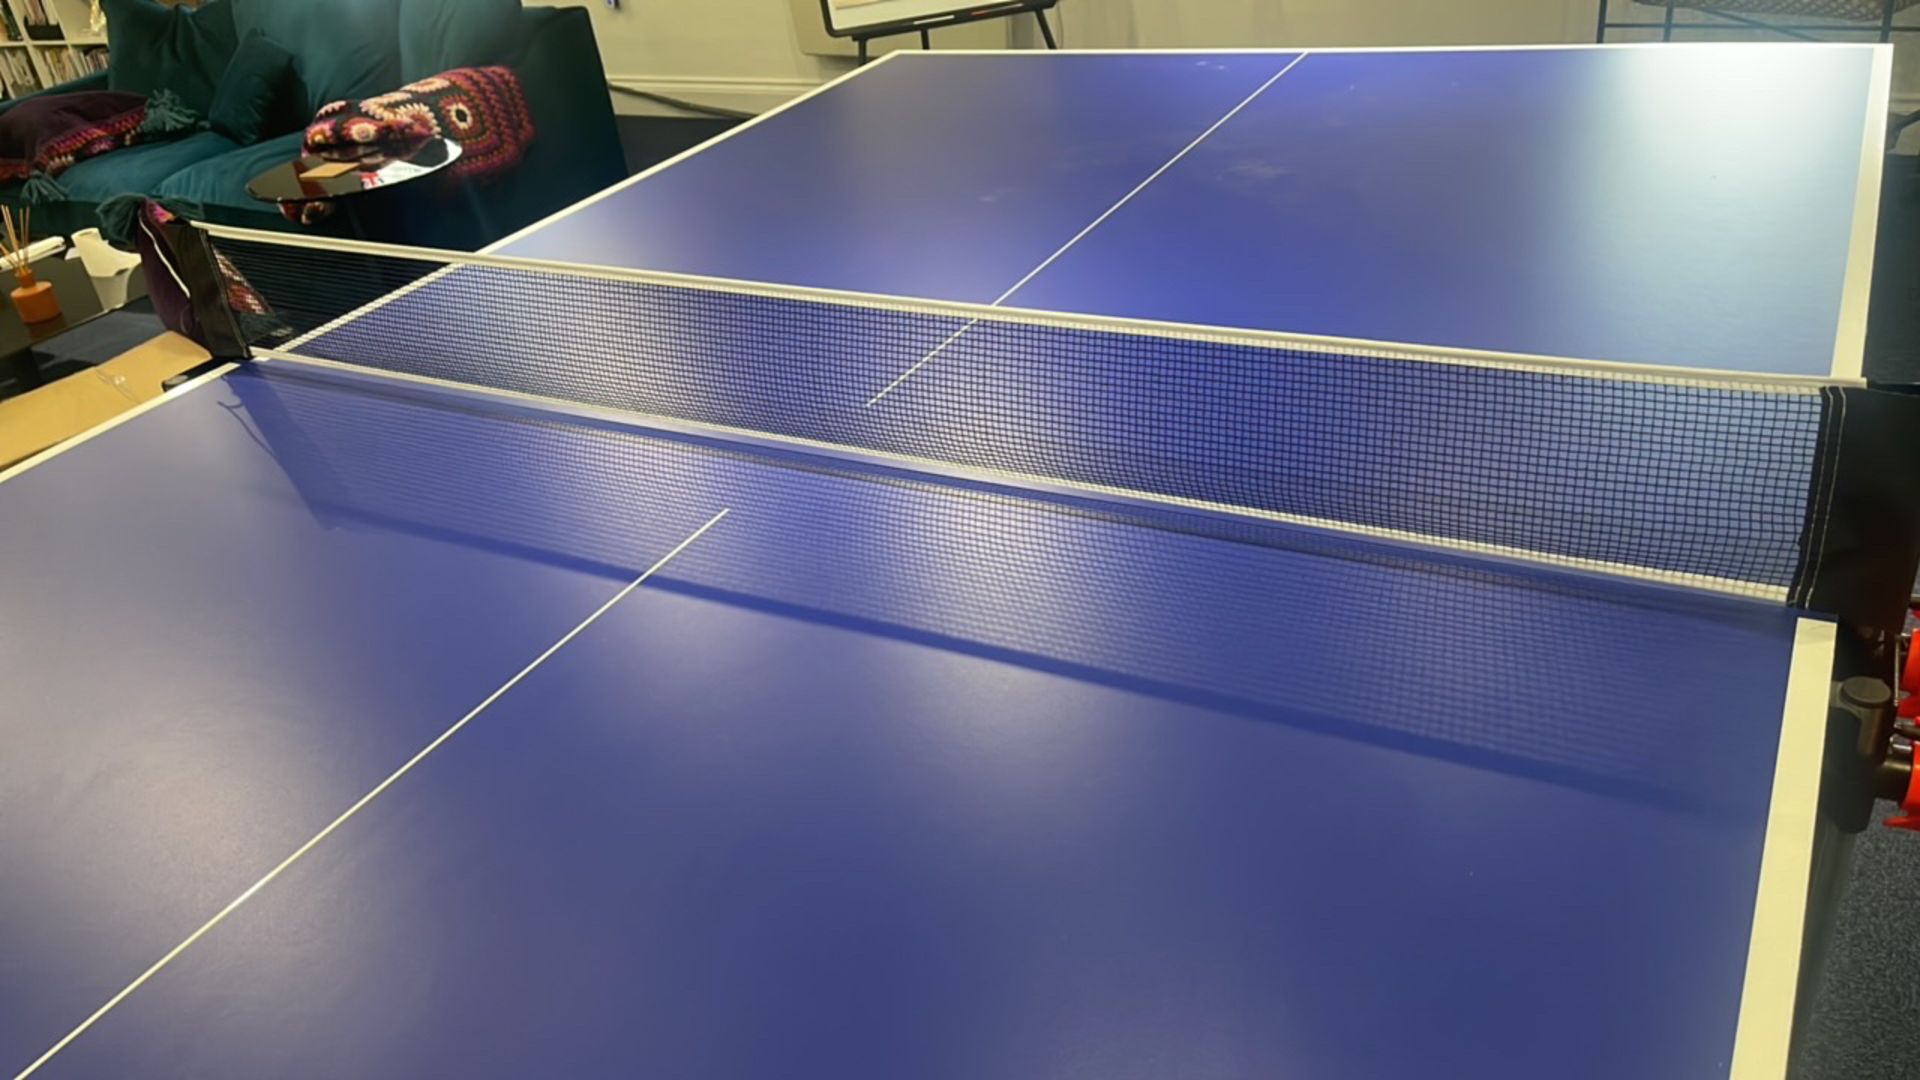 Table Tennis Table & Accesories - Image 5 of 6